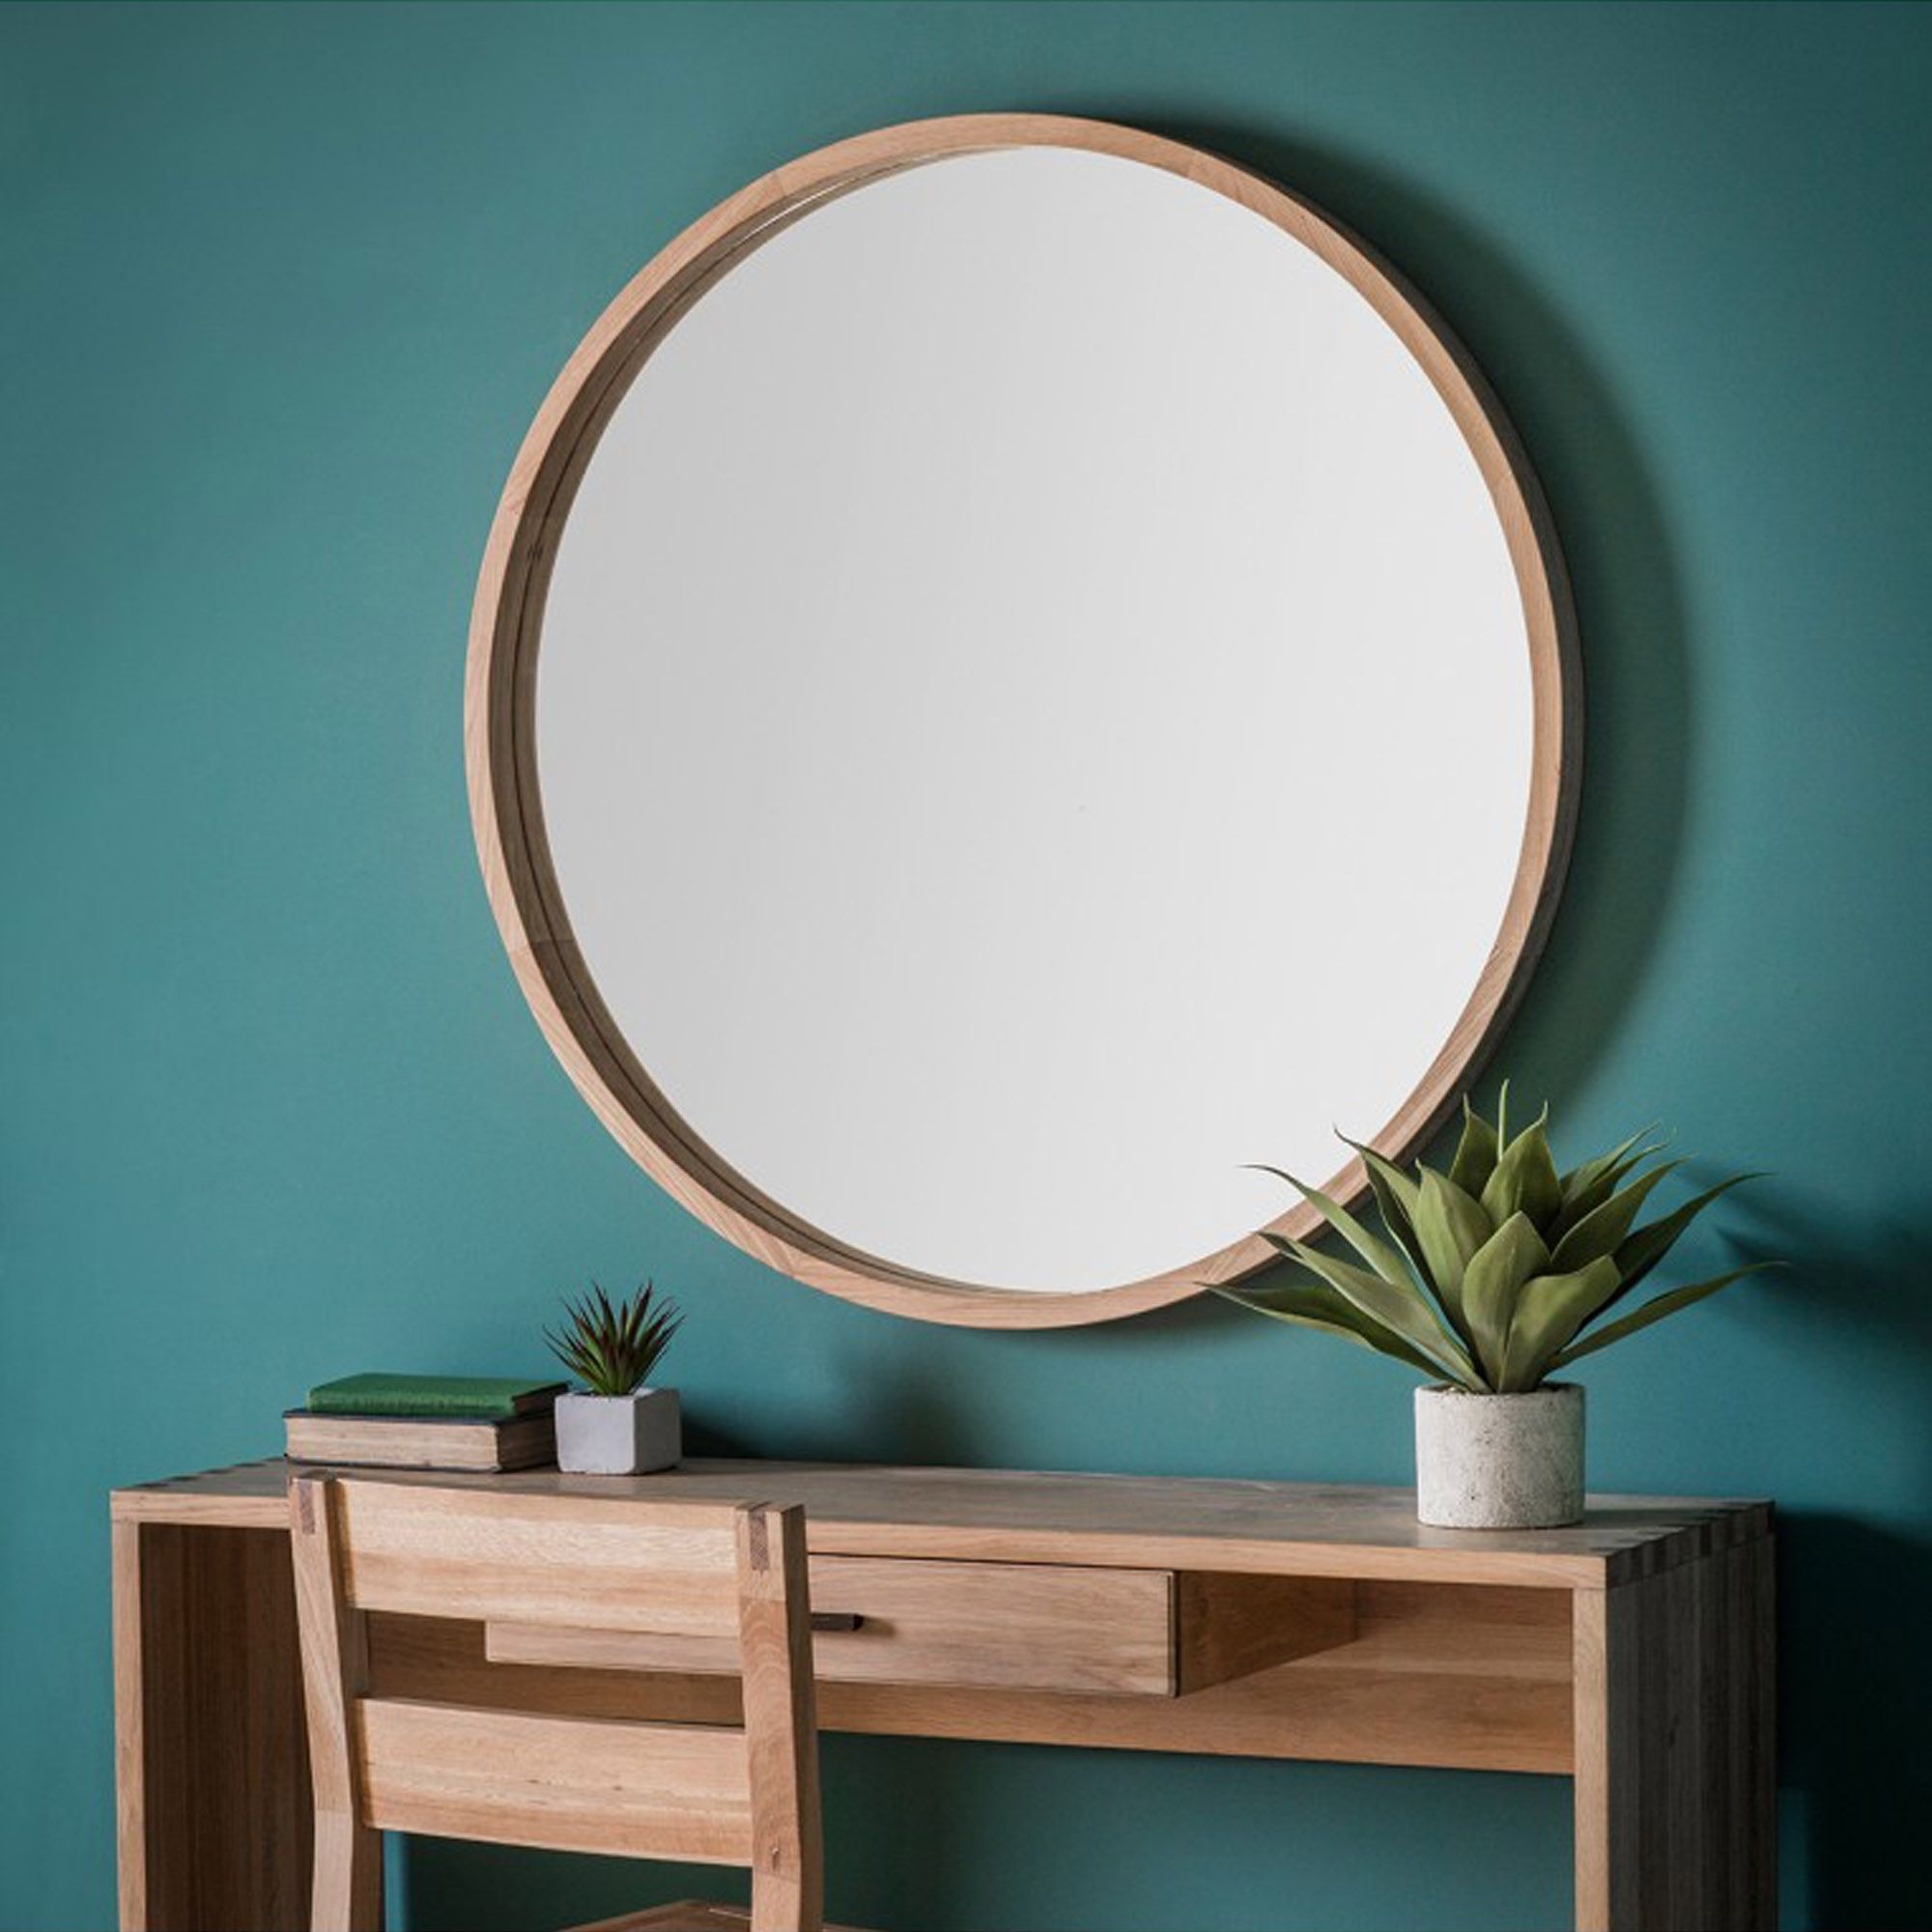 Bowman Large Round Wall Mirror | Wall Mirrors | Homesdirect365 Regarding Scalloped Round Modern Oversized Wall Mirrors (View 6 of 15)